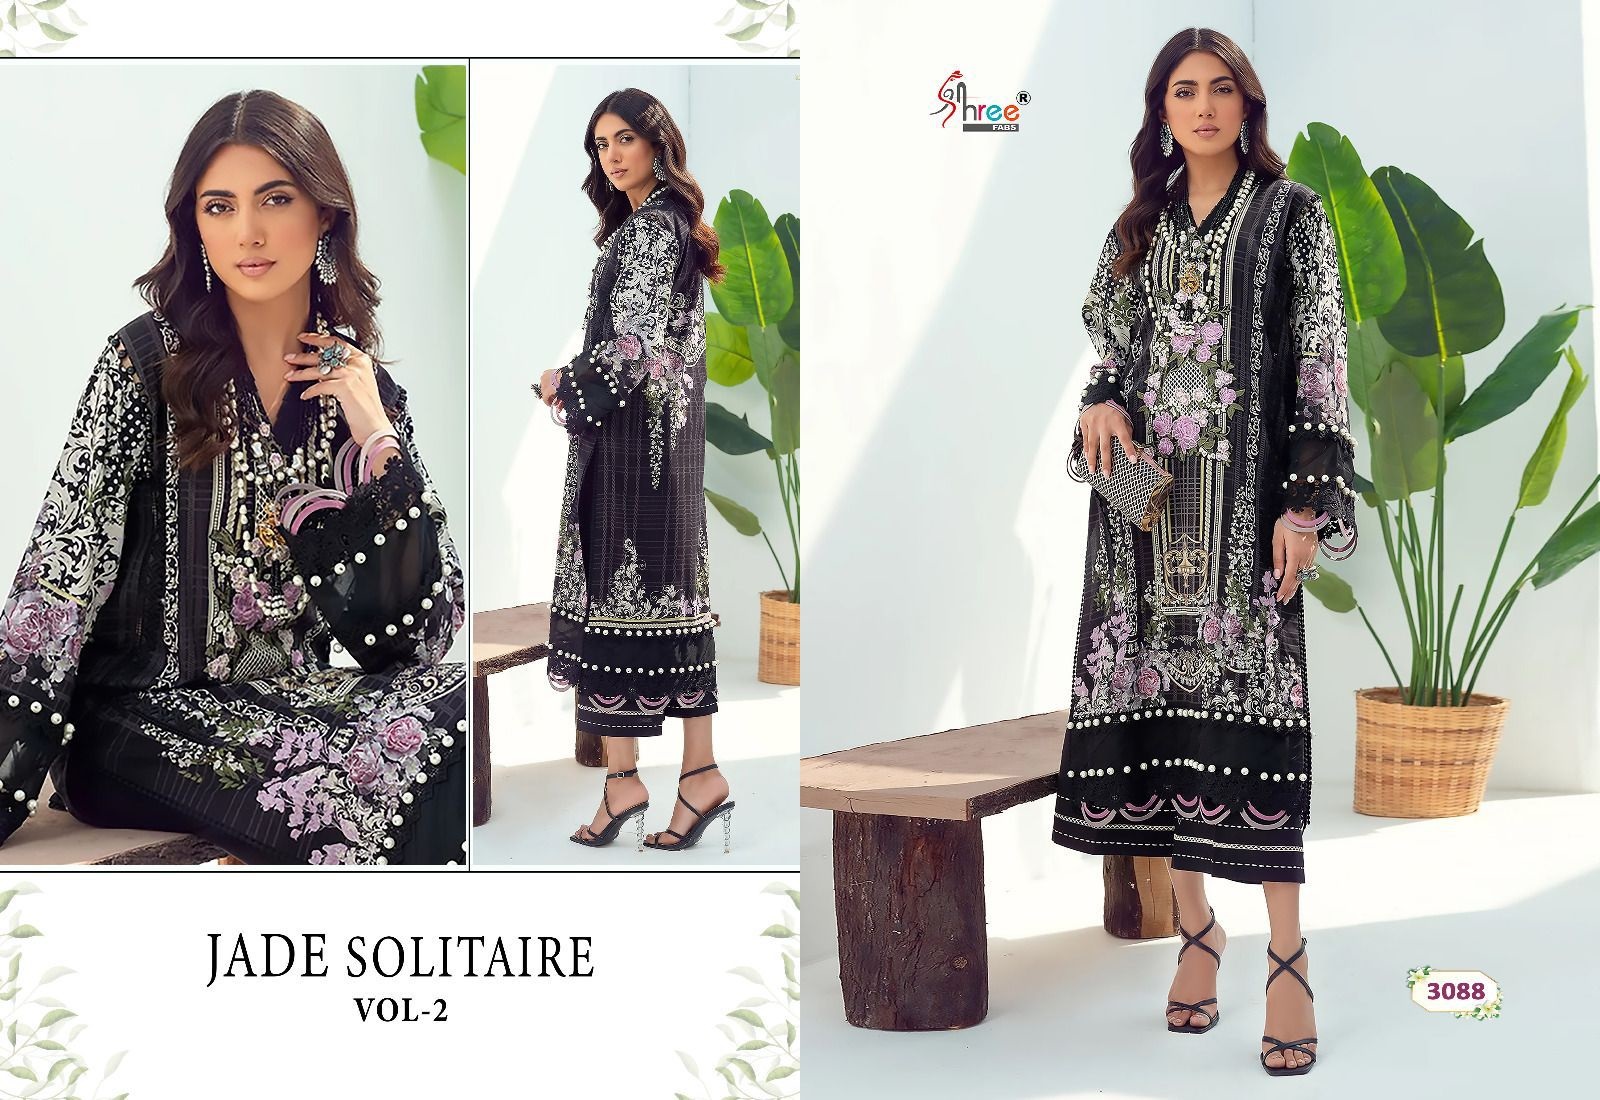 Shree Jade Solitaire Vol 2 collection 5